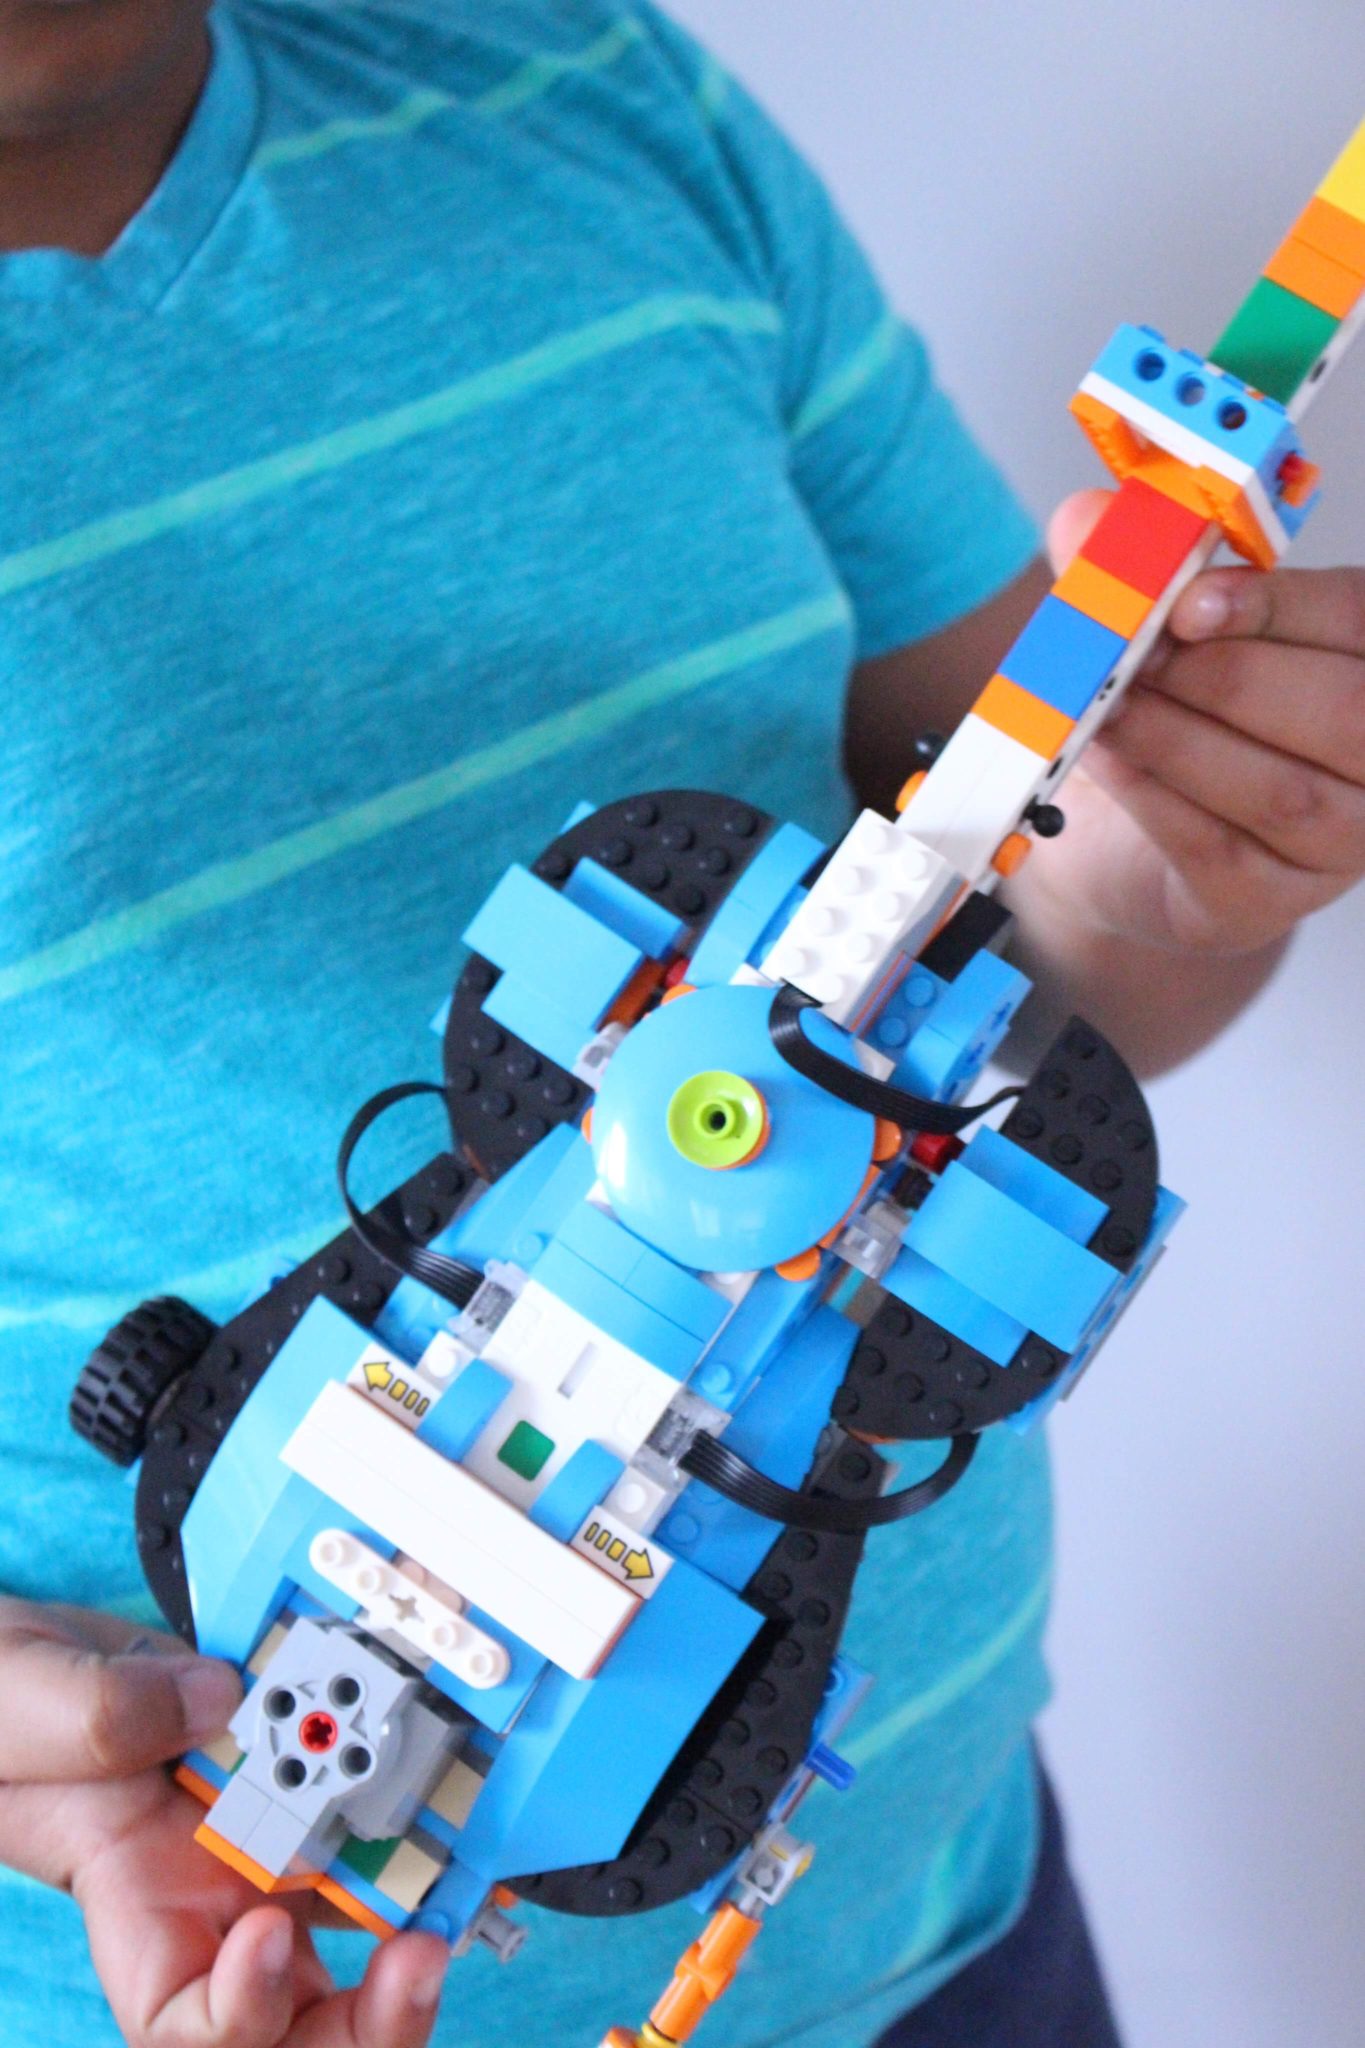 Bring Blocks To Life With Coding | LEGO BOOST Review